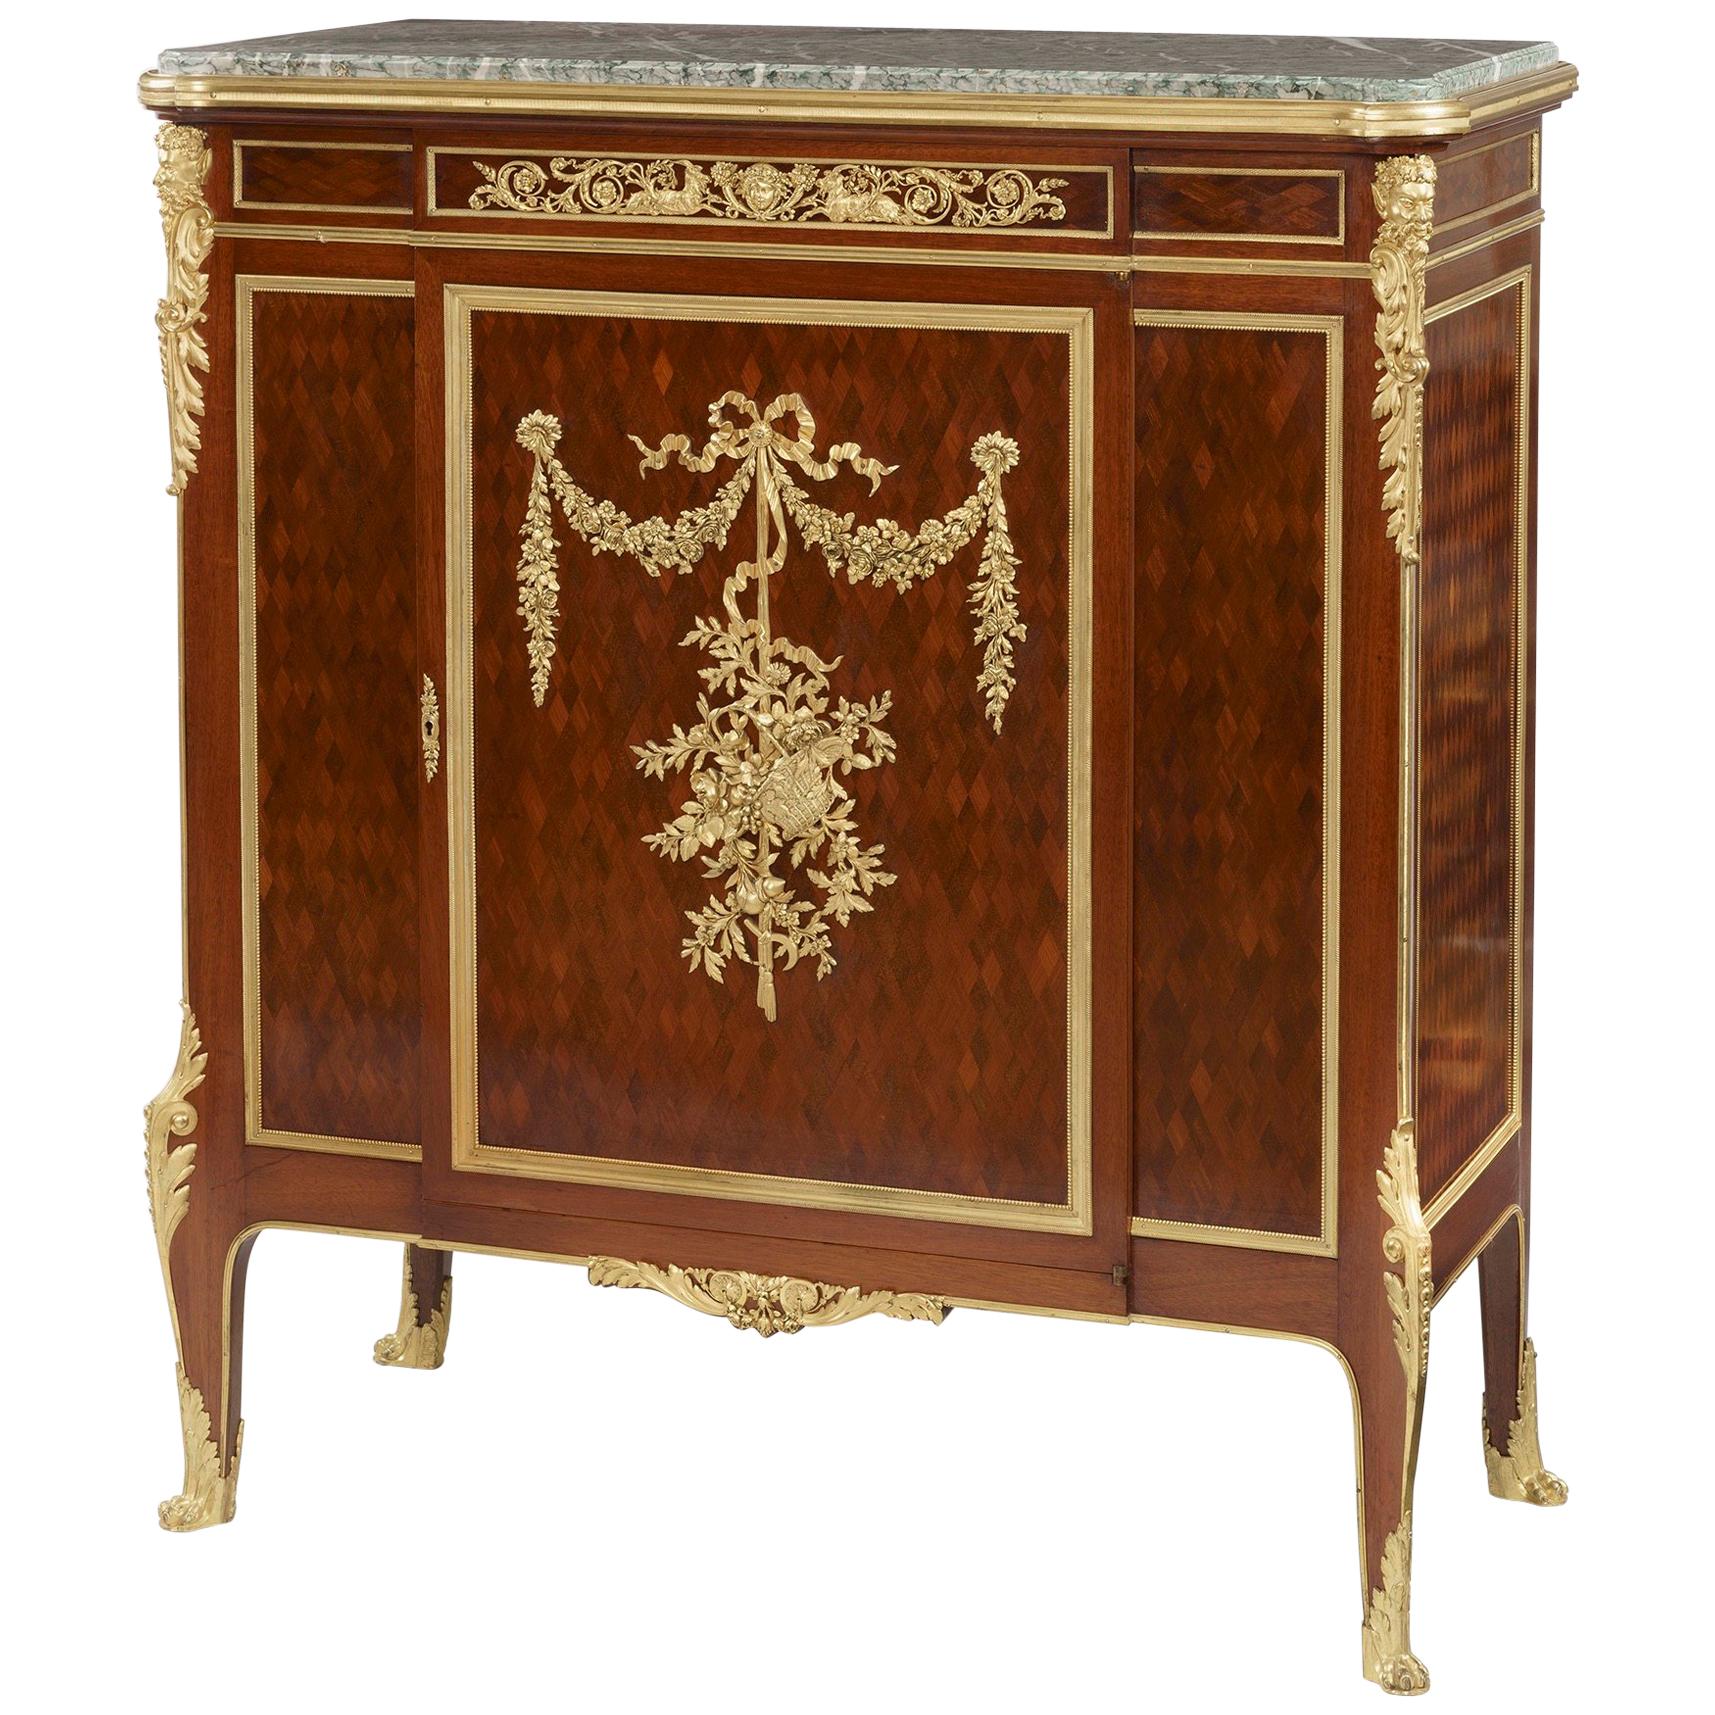 19th Century Ormolu-Mounted Parquetry Cabinet by François Linke